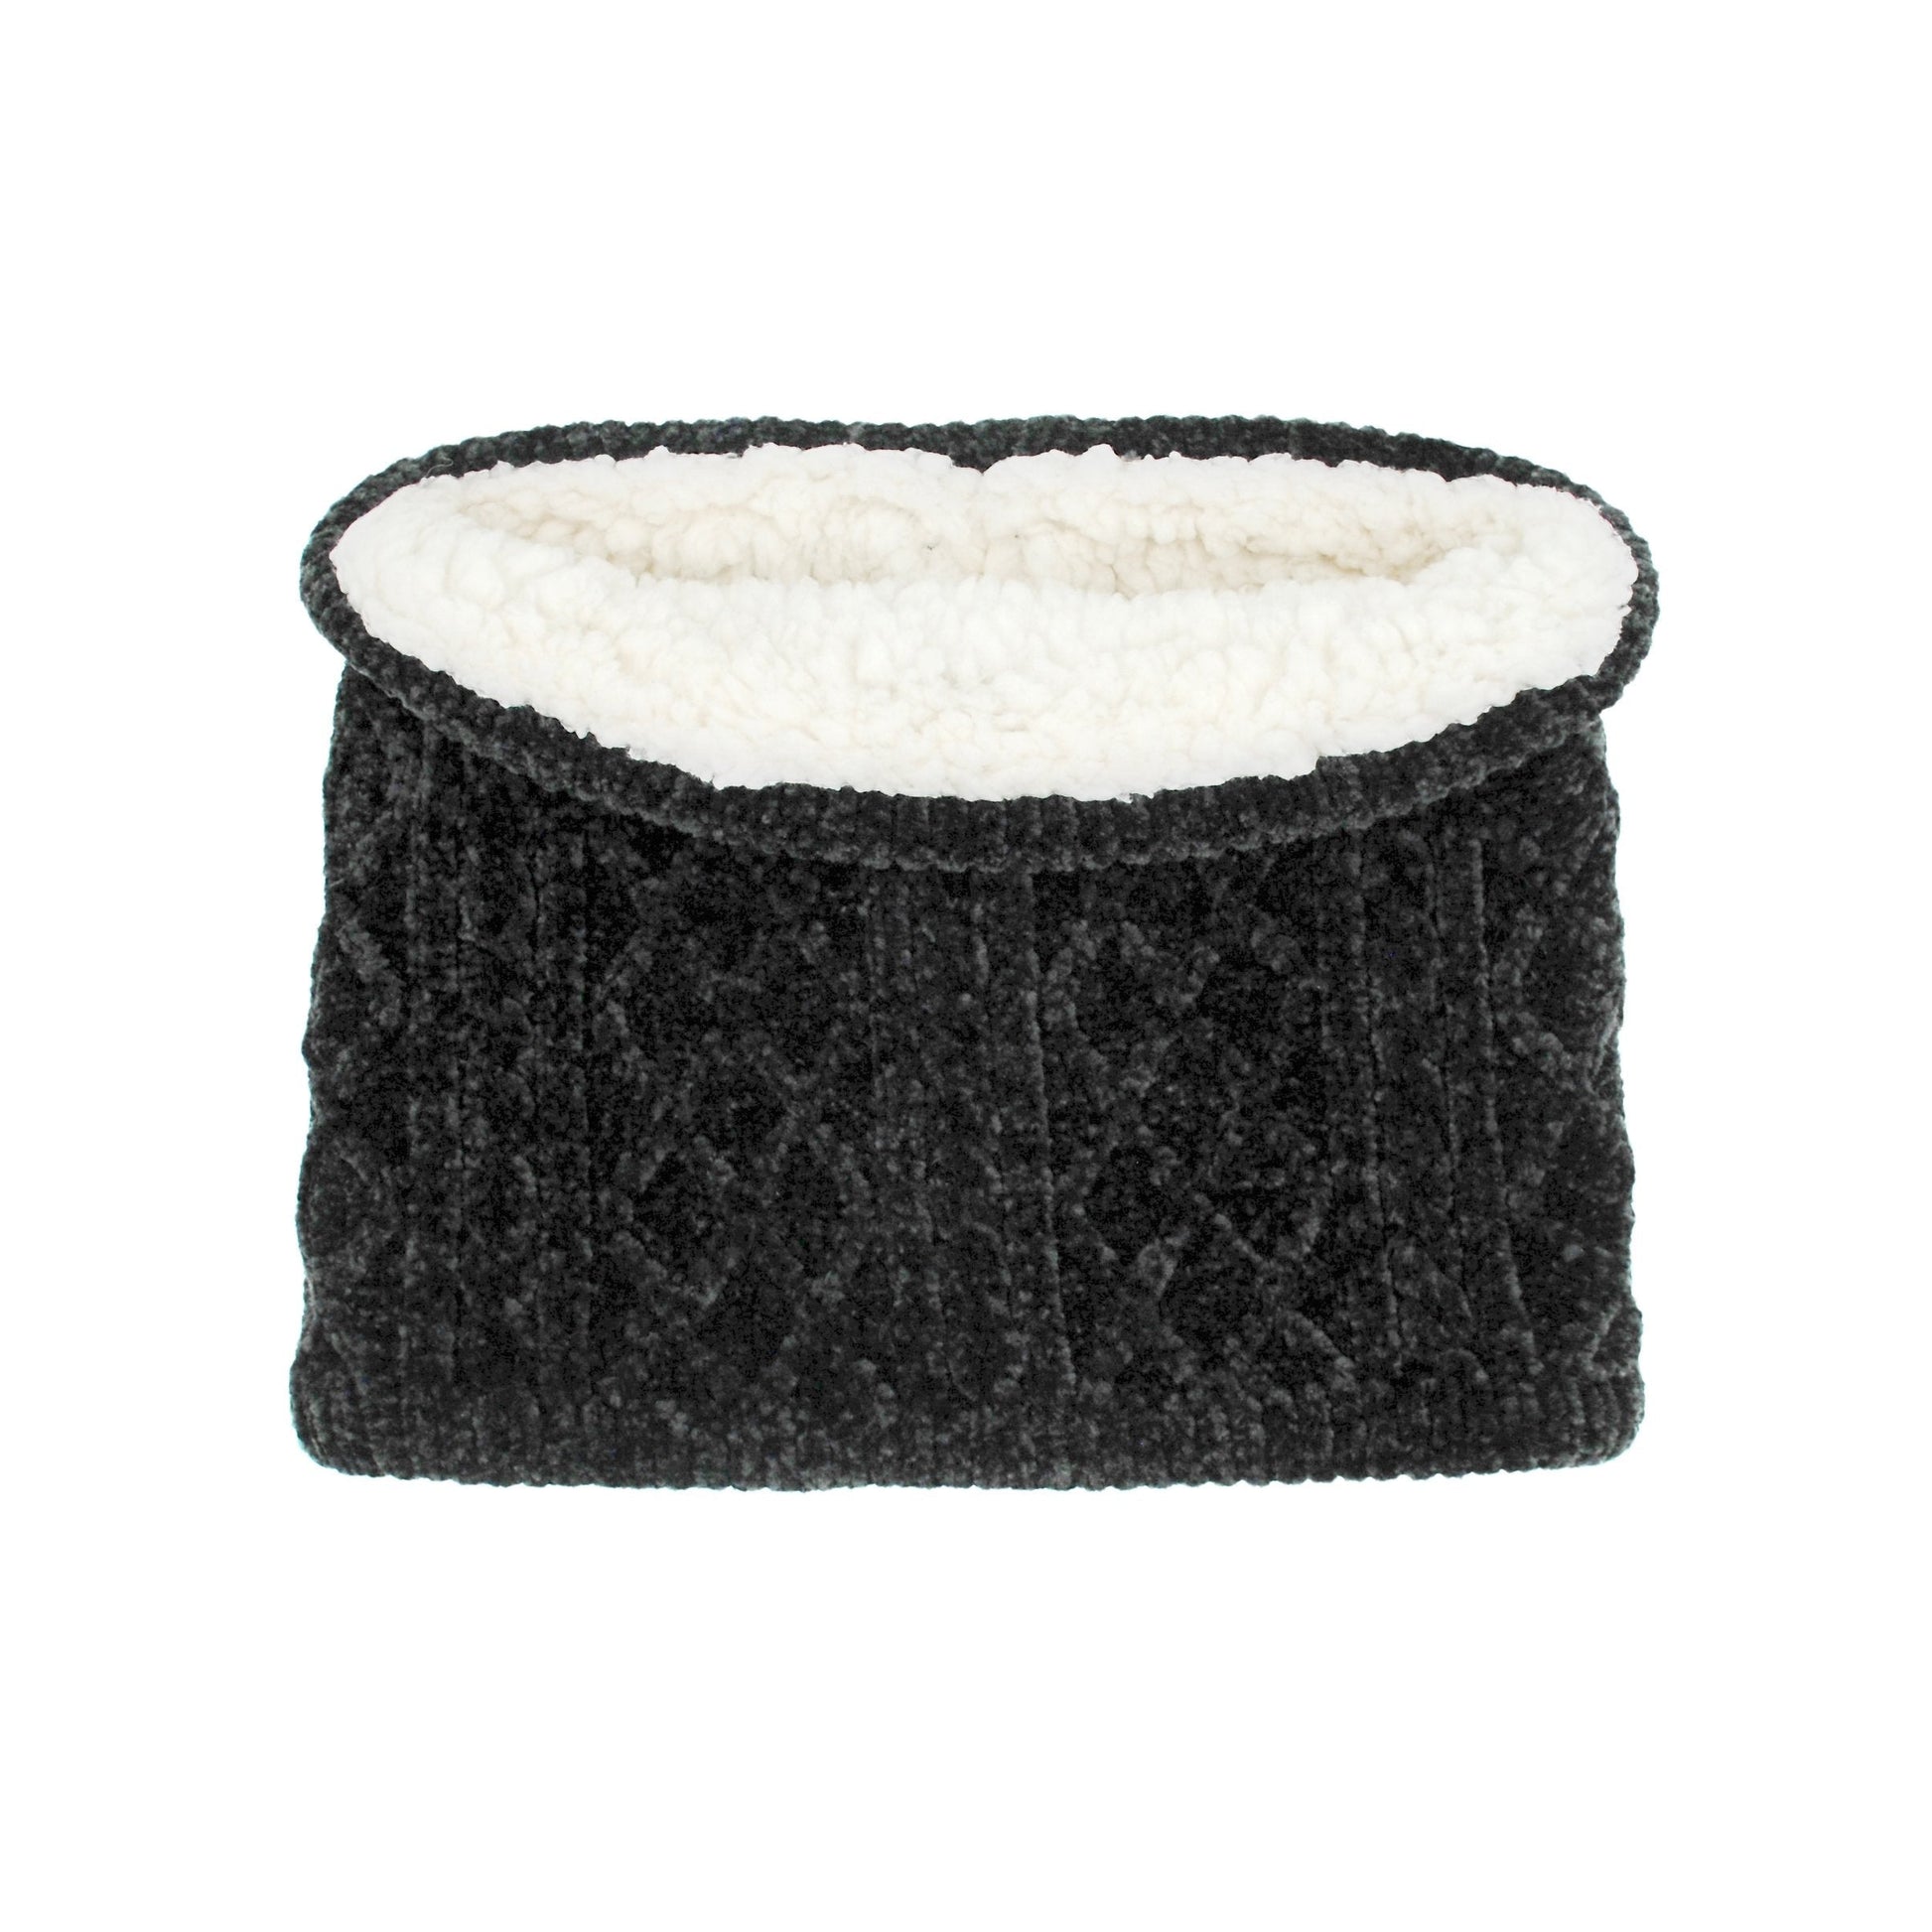 Pudus Cable Knit Winter Infinity Scarf Black, Fleece-Lined Neck Warmer Circle Snood Chenille